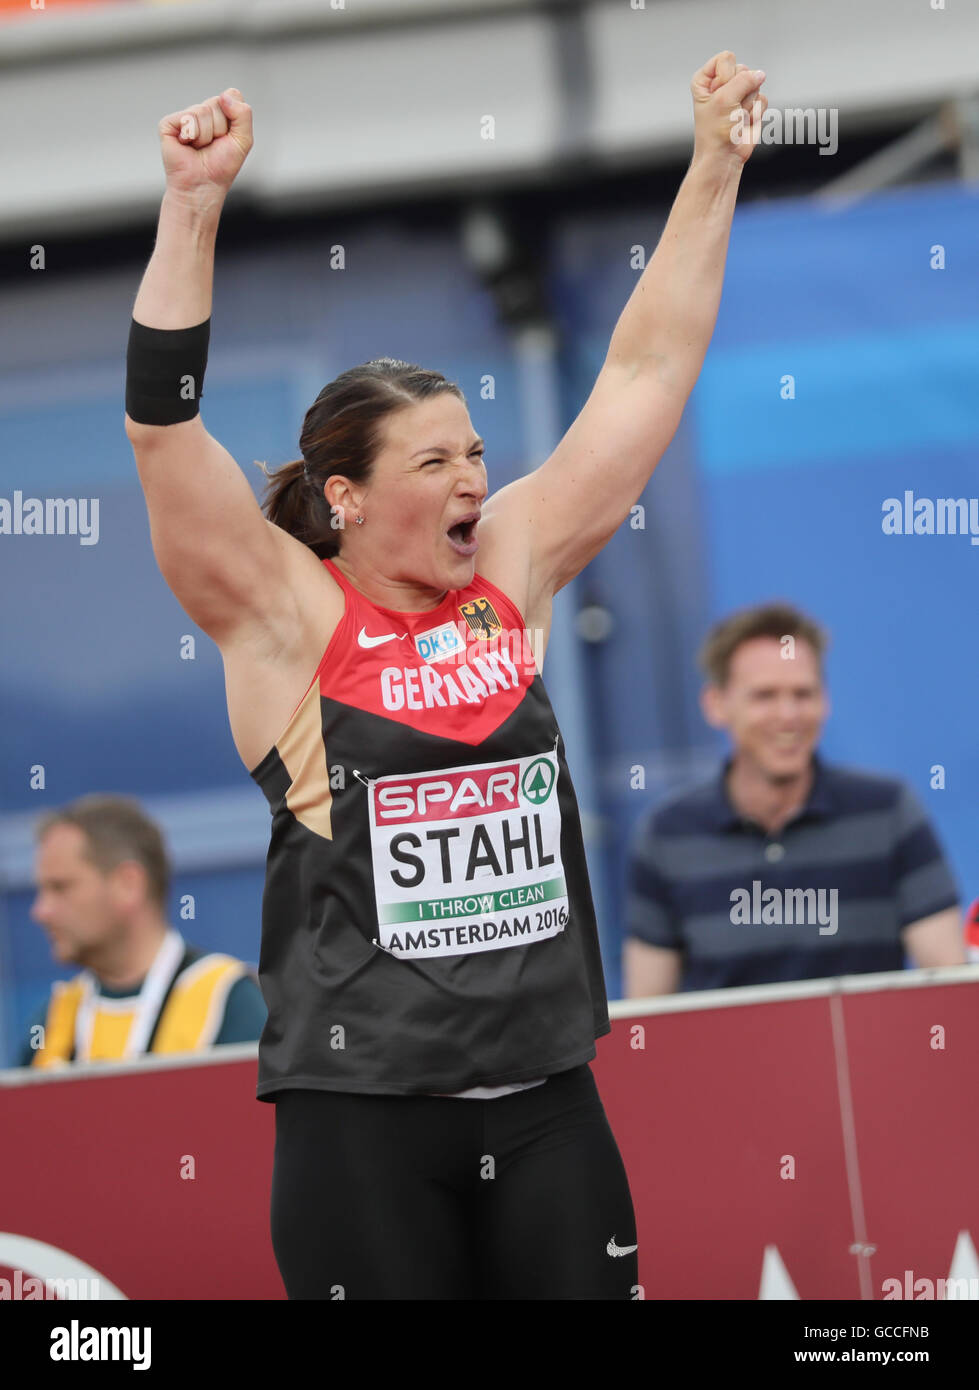 Amsterdam, The Netherlands. 9th July, 2016. Germany's Linda Stahl celebrates after the women's Javelin Throw final at the European Athletics Championships at the Olympic Stadium in Amsterdam, The Netherlands, 09 July 2016. Stahl placed 2nd. Photo: Michael Kappeler/dpa/Alamy Live News Stock Photo